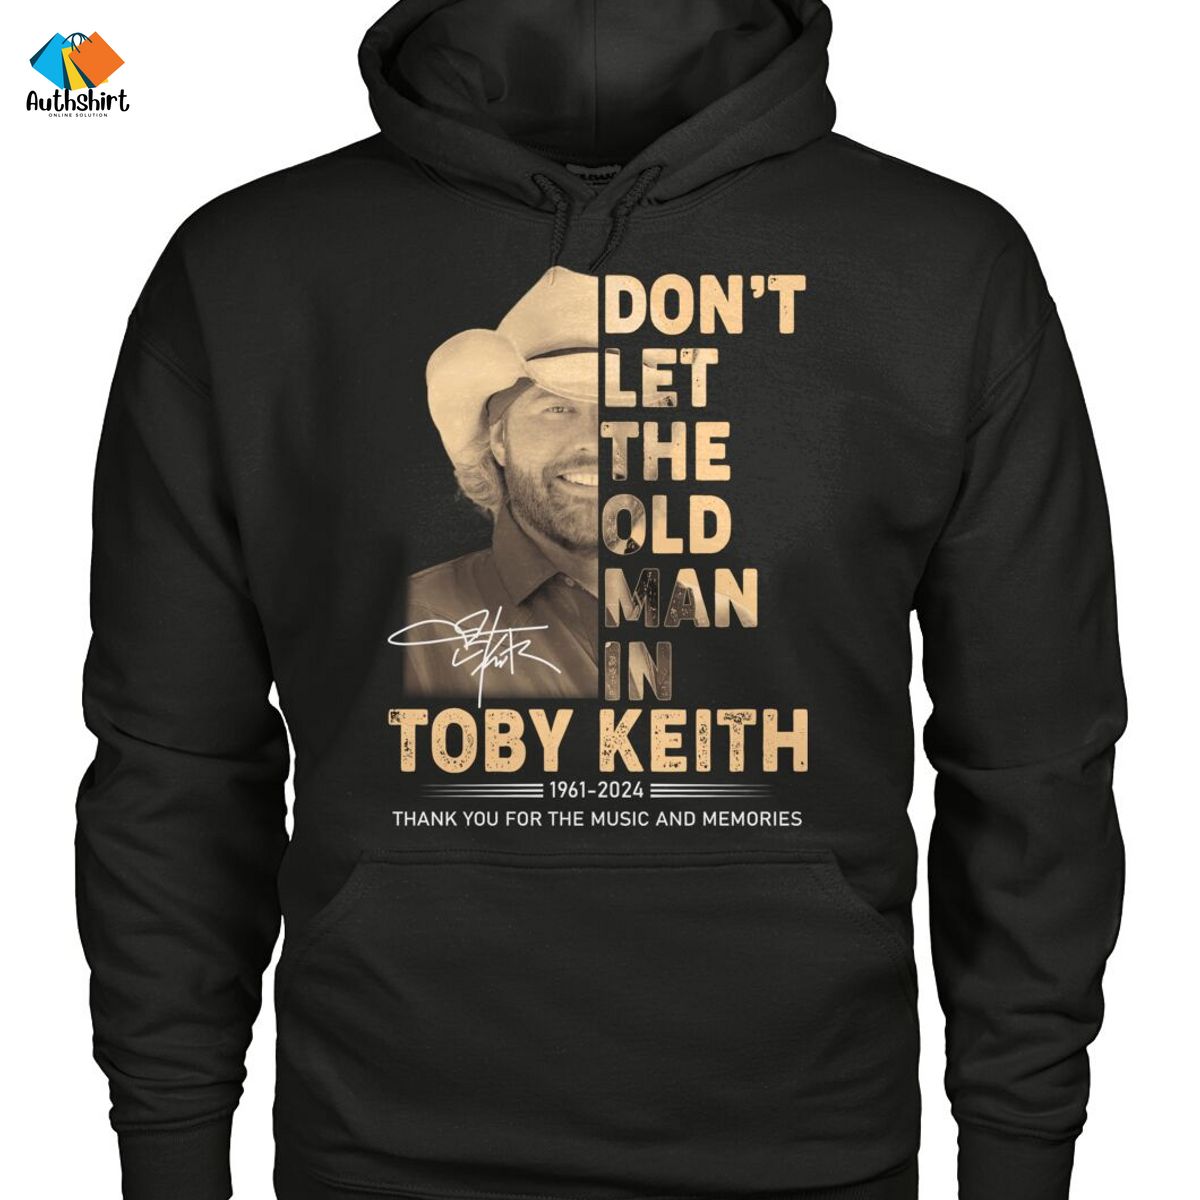 Don't Let The Old Man In Toby Keith Thank You For The Music And Memories Shirt